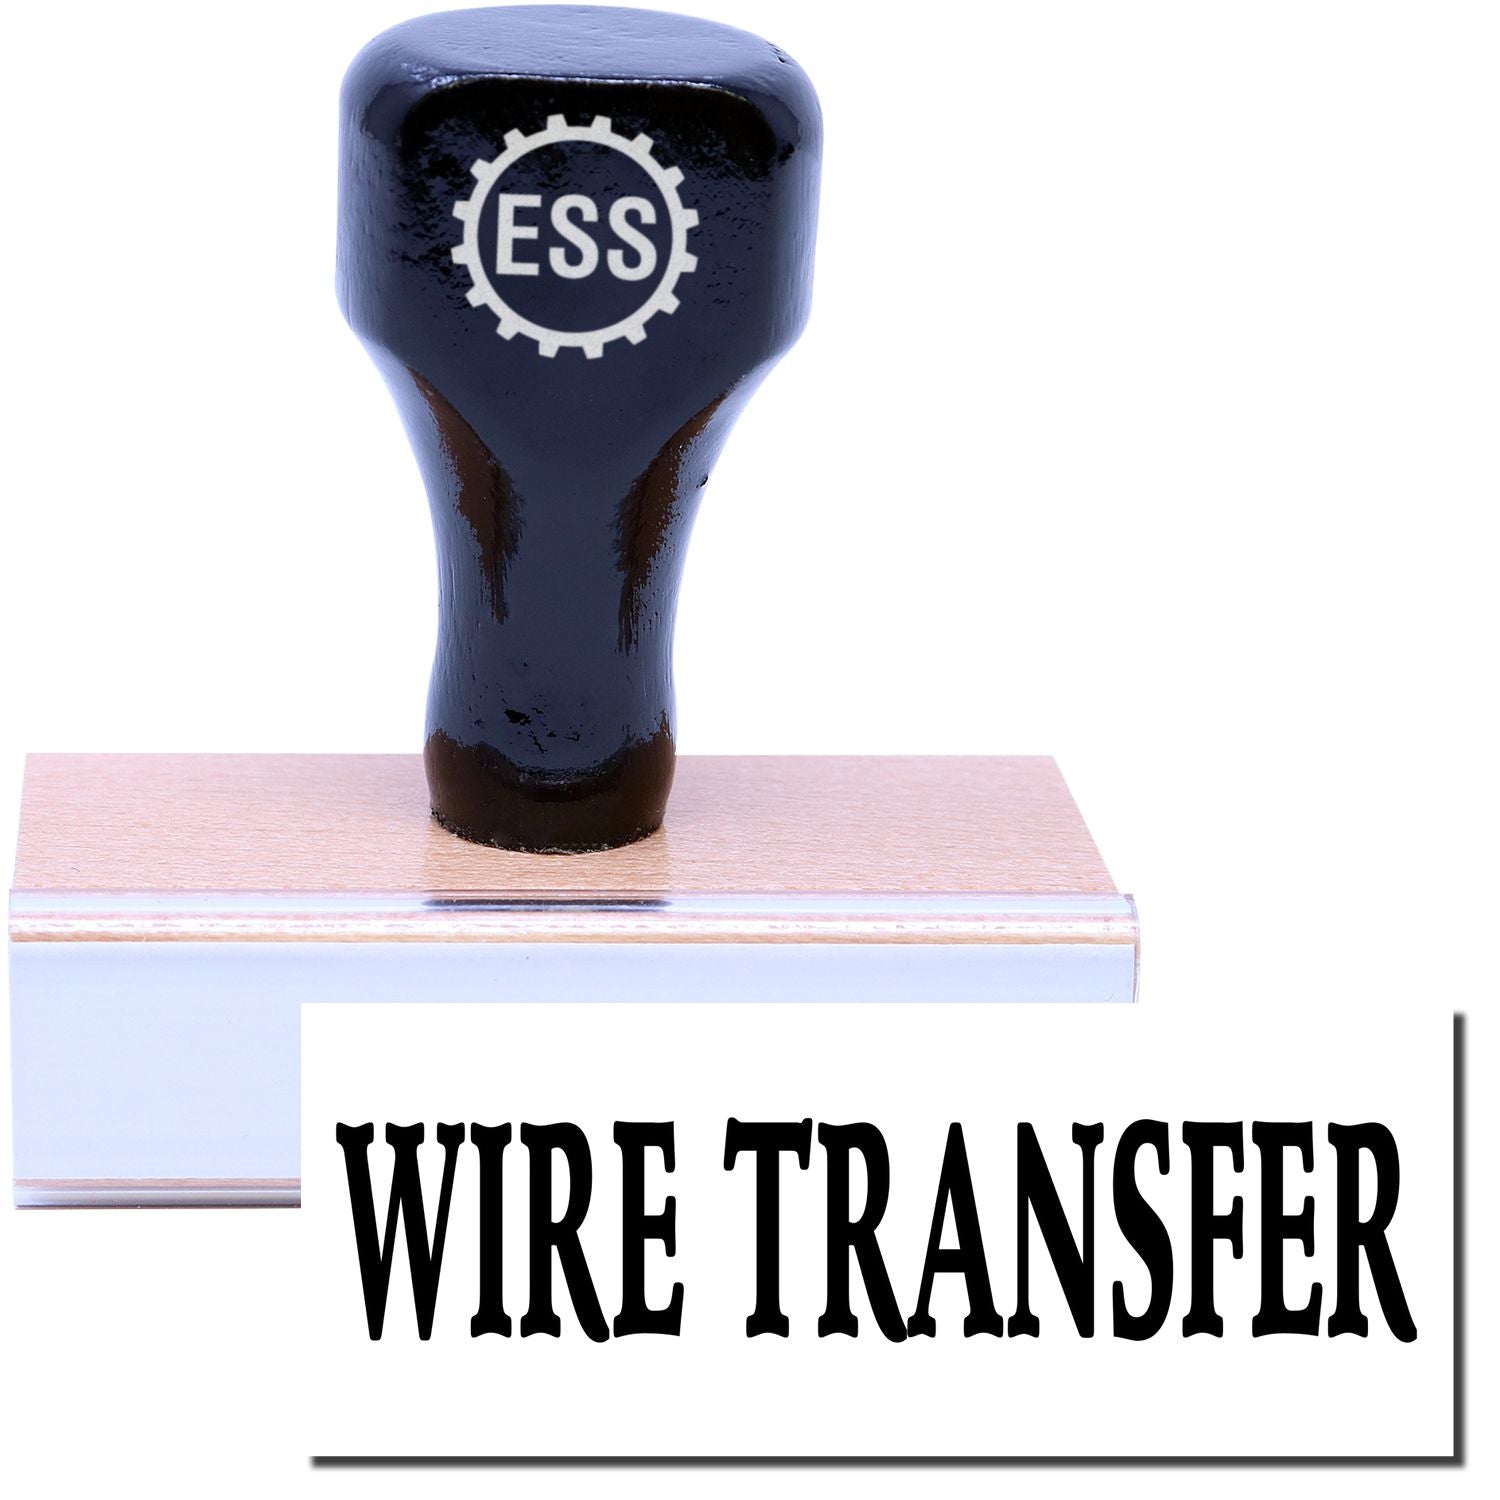 A stock office rubber stamp with a stamped image showing how the text "WIRE TRANSFER" is displayed after stamping.